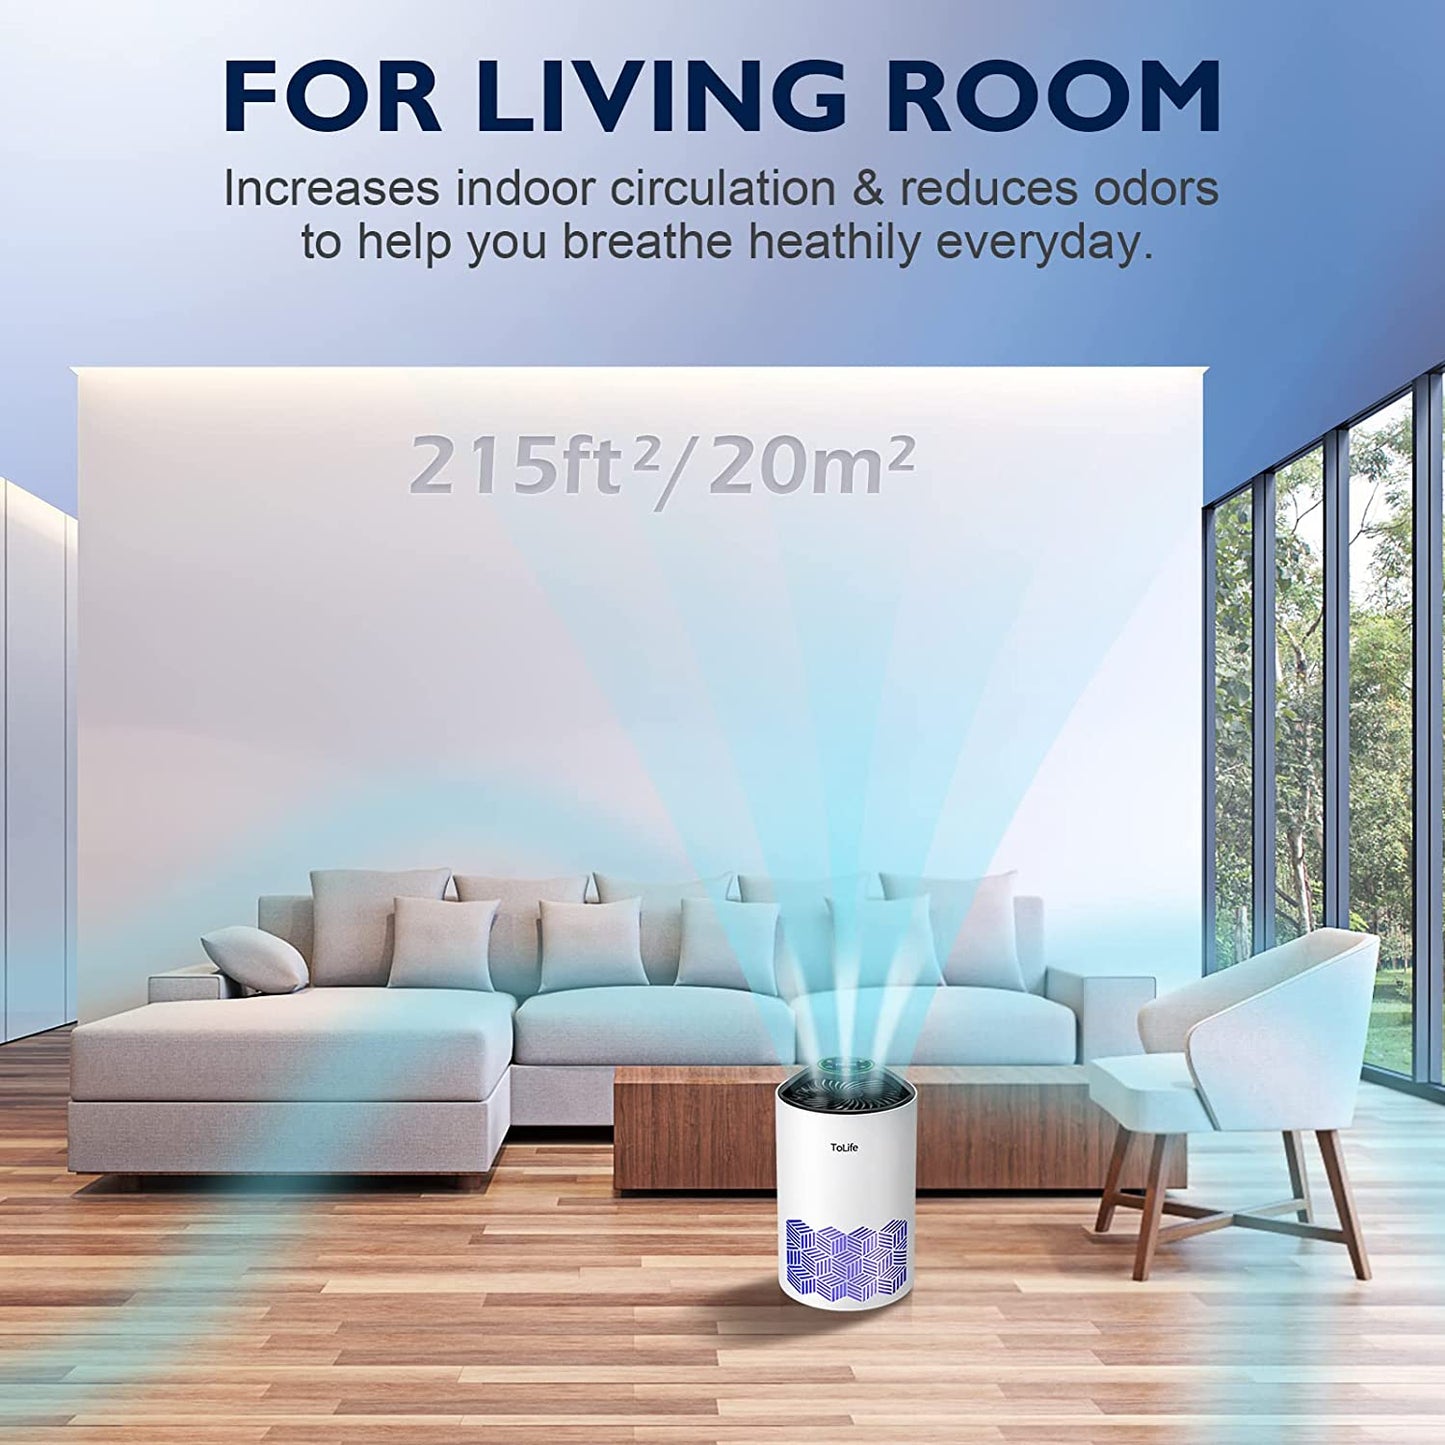 ToLife Air Purifiers for Home with H13 True HEPA Filter, Air Purifier for Home Large Room Cleans up to 215 Sq. Ft and Filters 99.9% of Allergens, Pet Dander, Dust, 25dB Quiet Air Cleaner for Bedroom- White